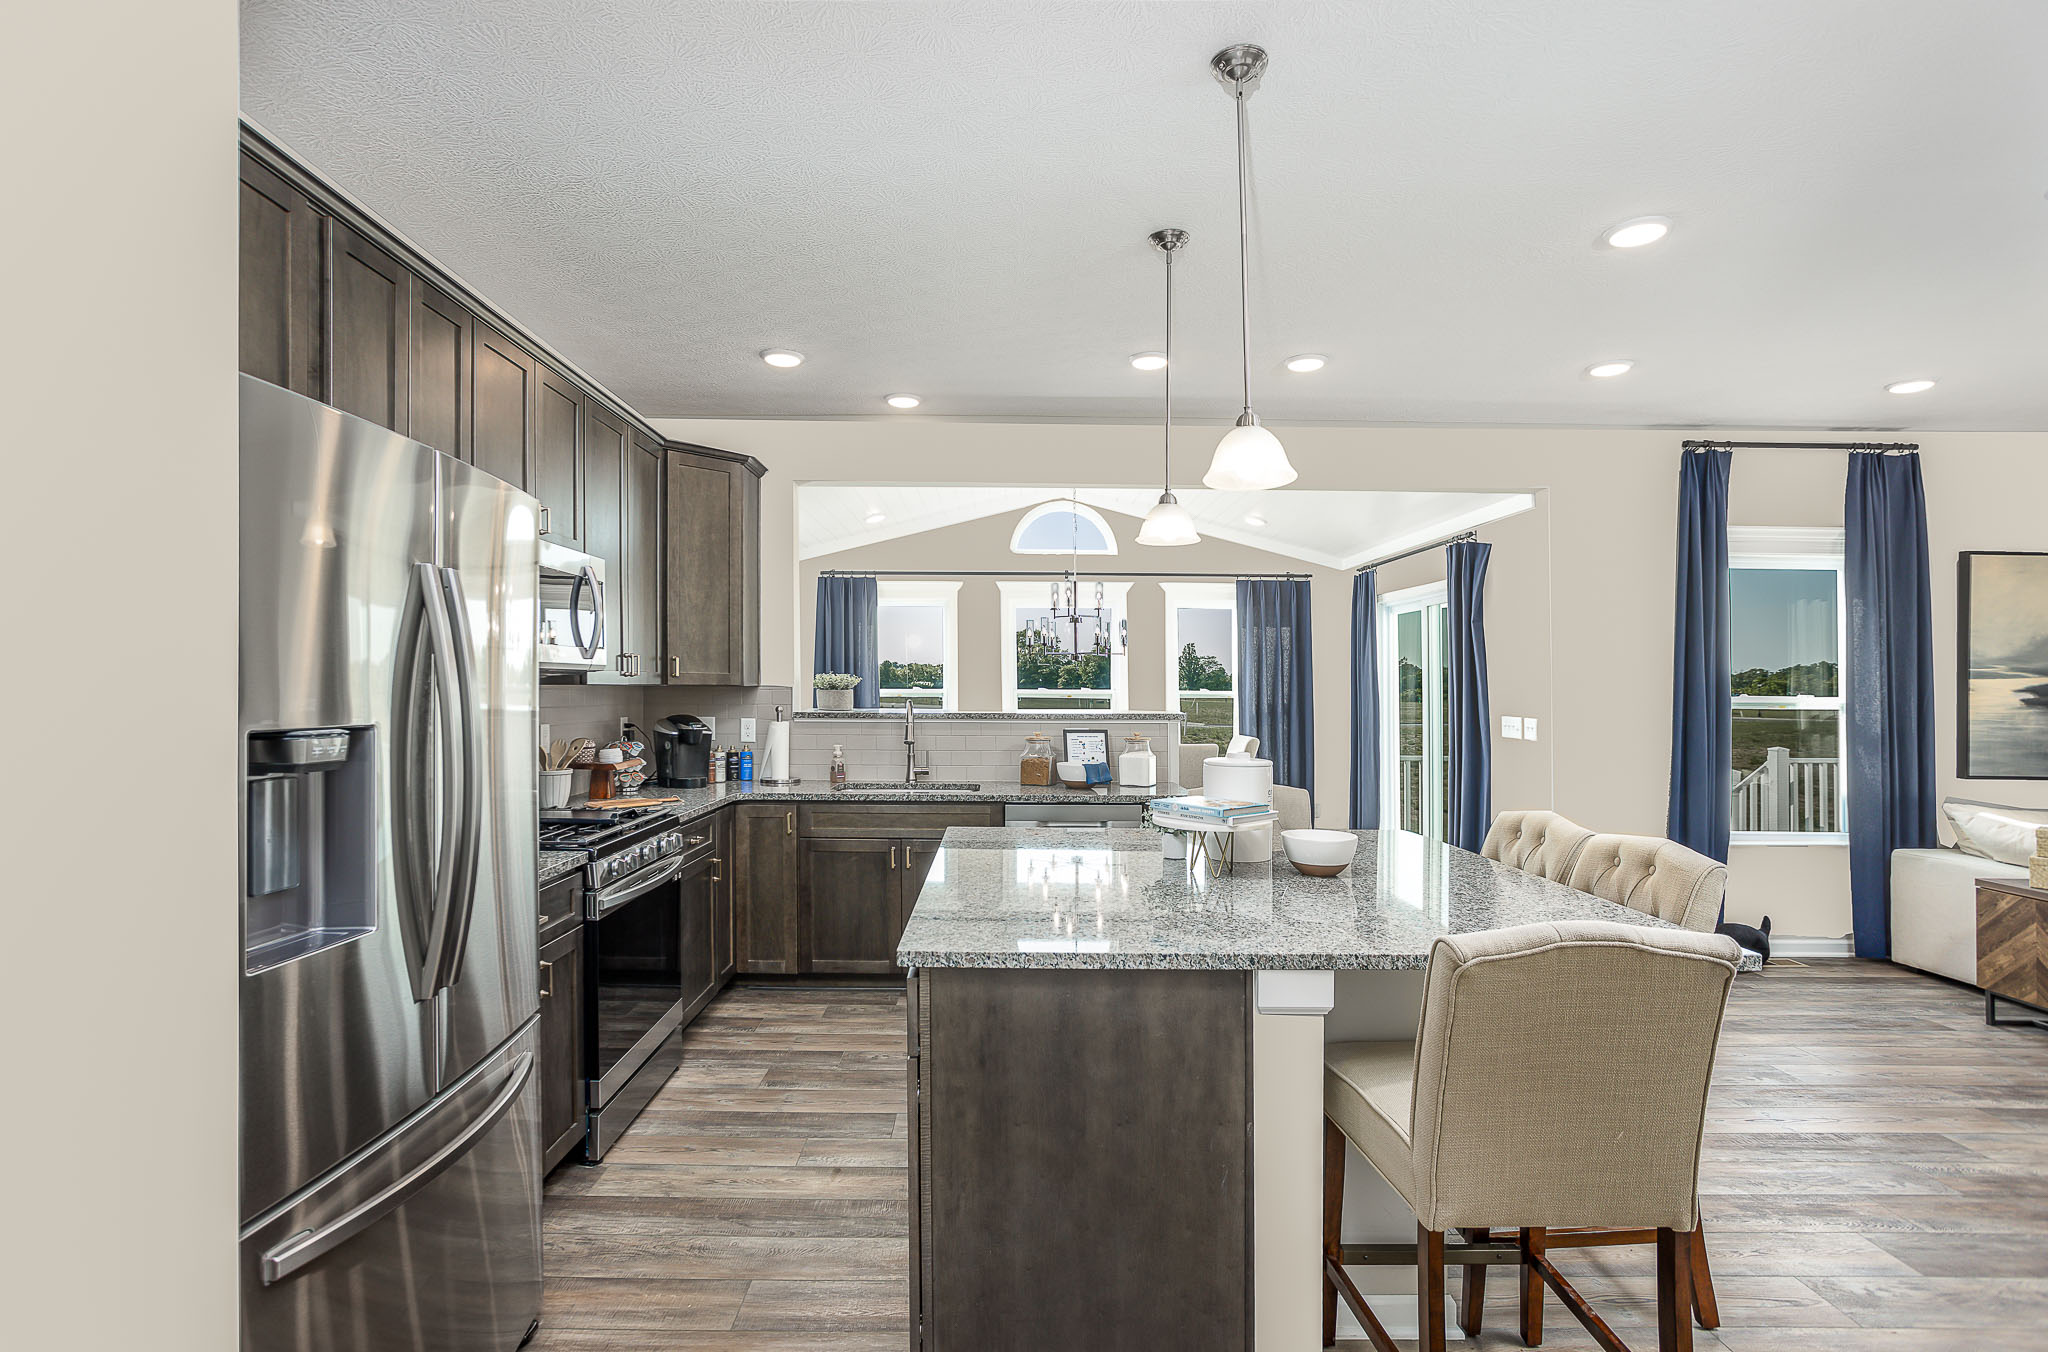 Modern kitchen with eat-in island in a new home for sale in Sarver